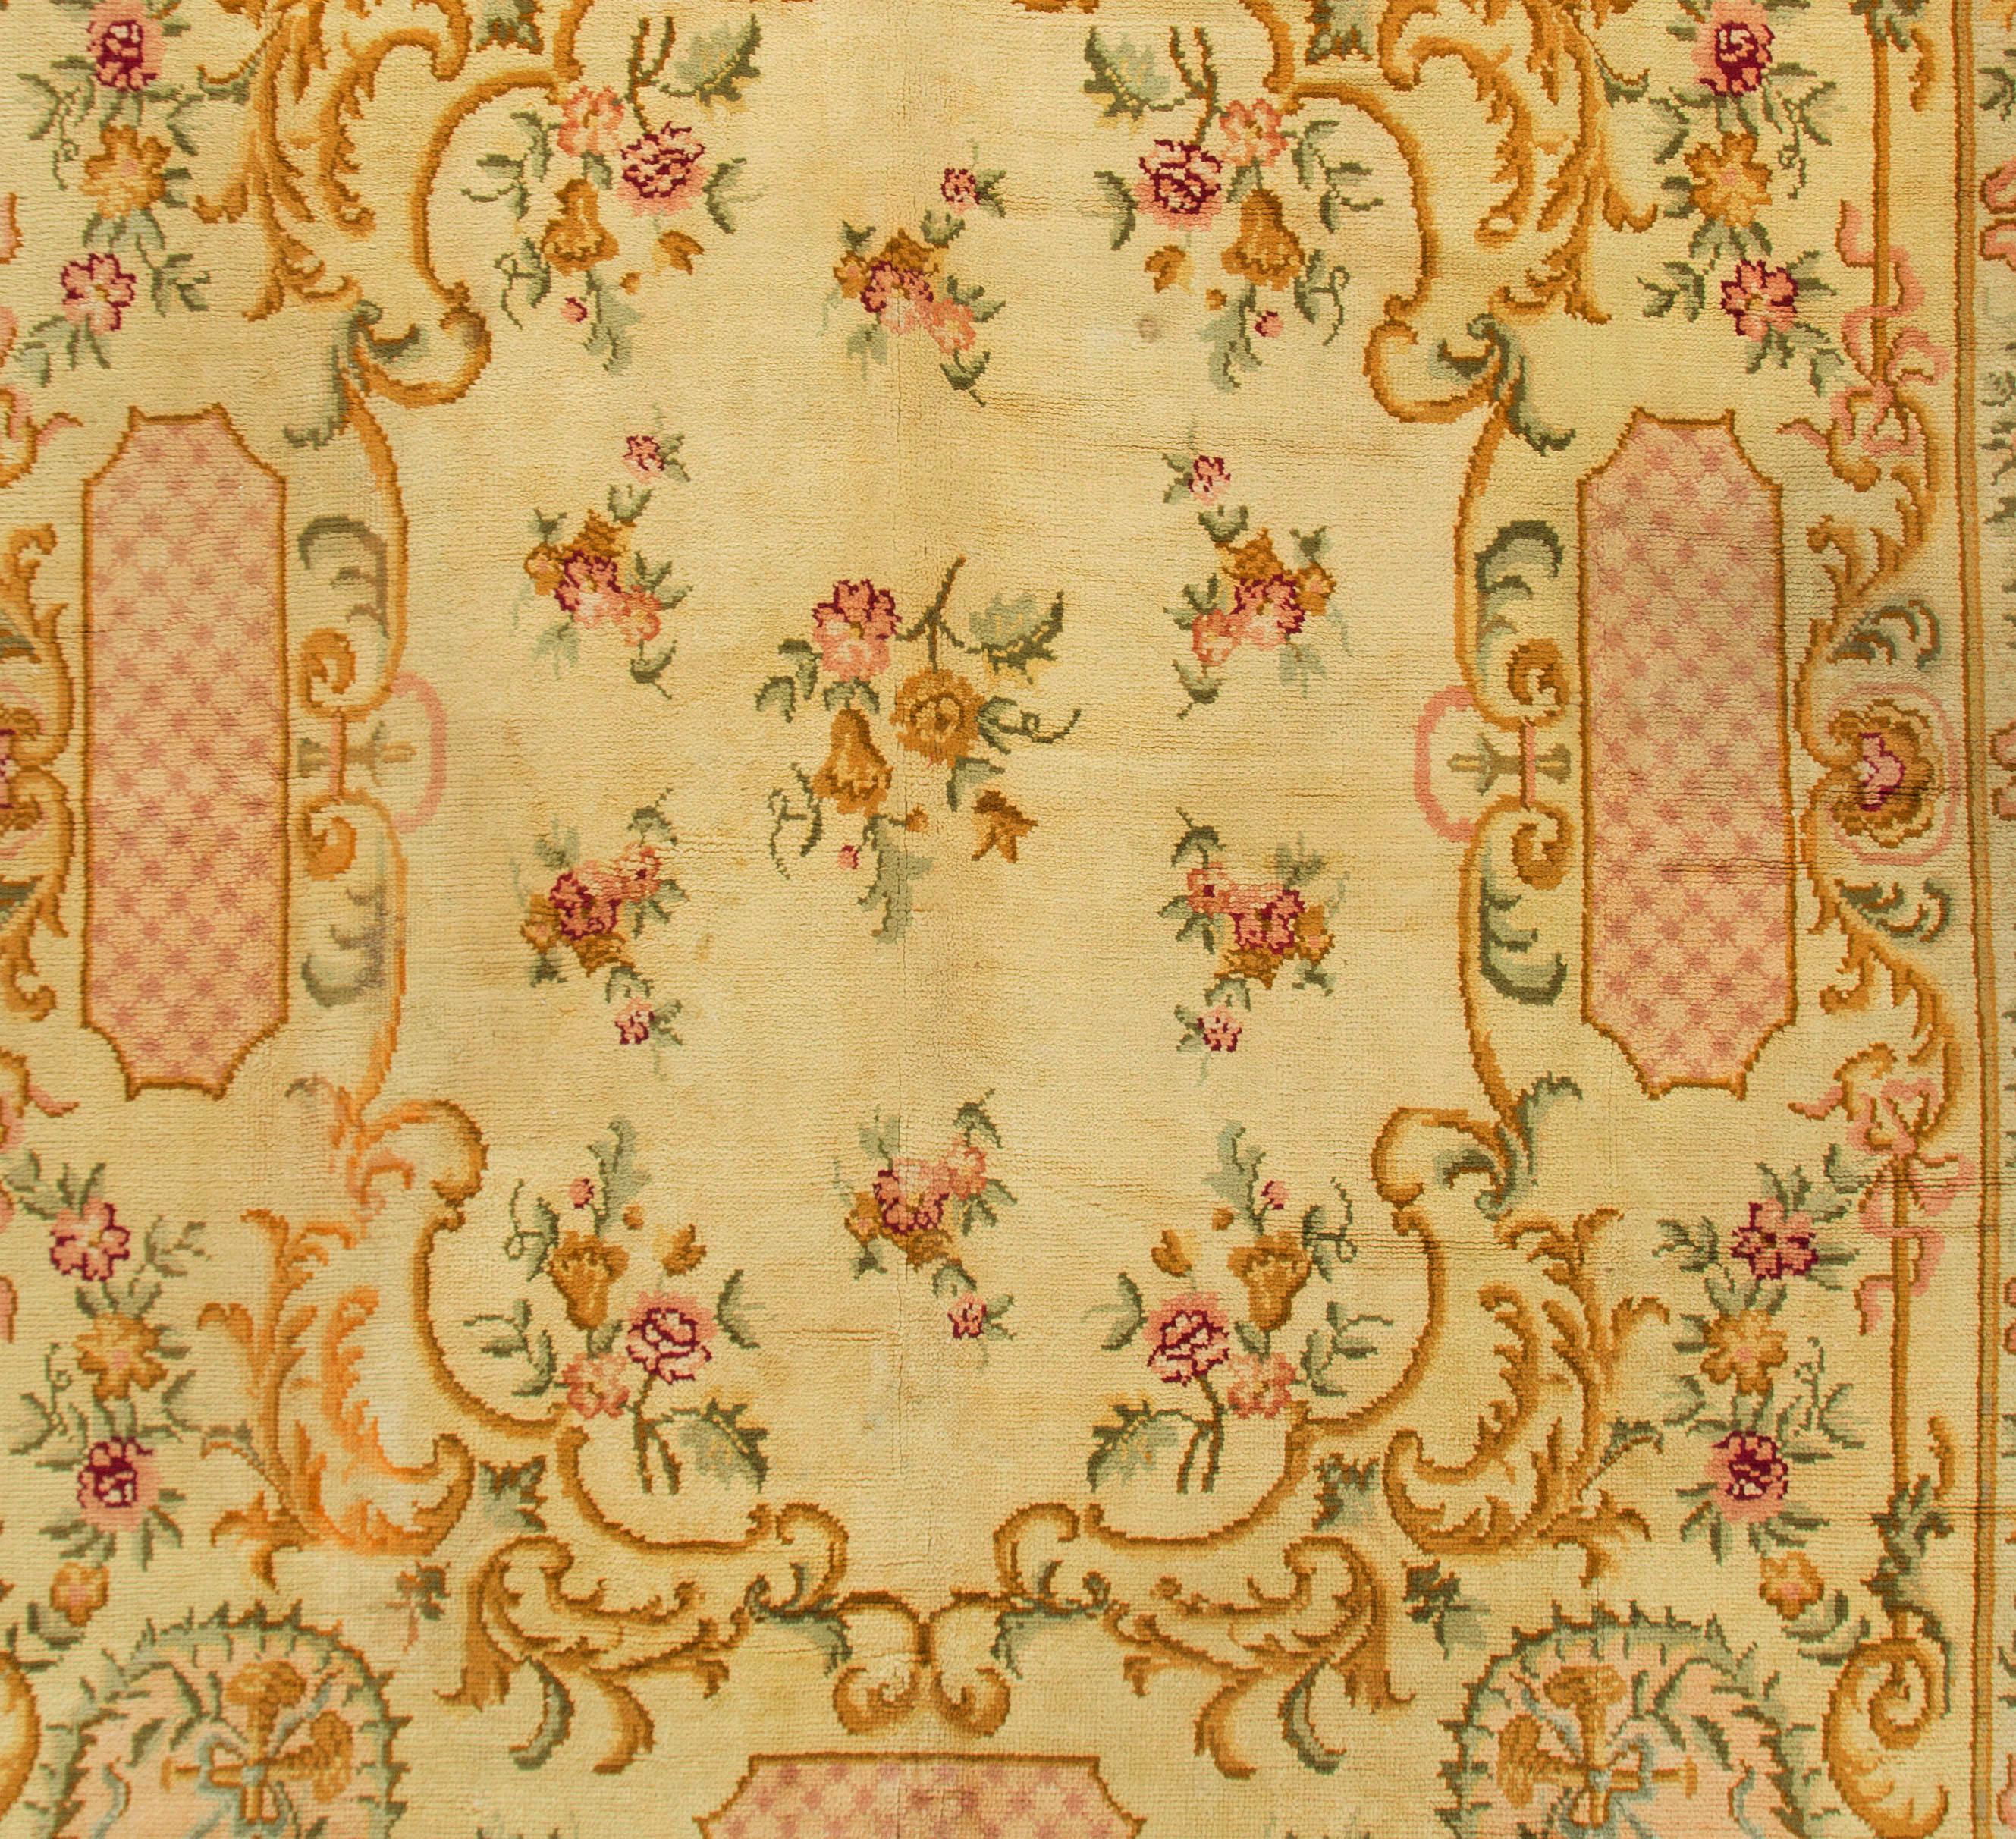 Antique French ivory Savonnerie carpet. French Savonnerie carpet with traditional European floral motif, ivory/soft pink/multi. Size: 10'4 x 12'8.